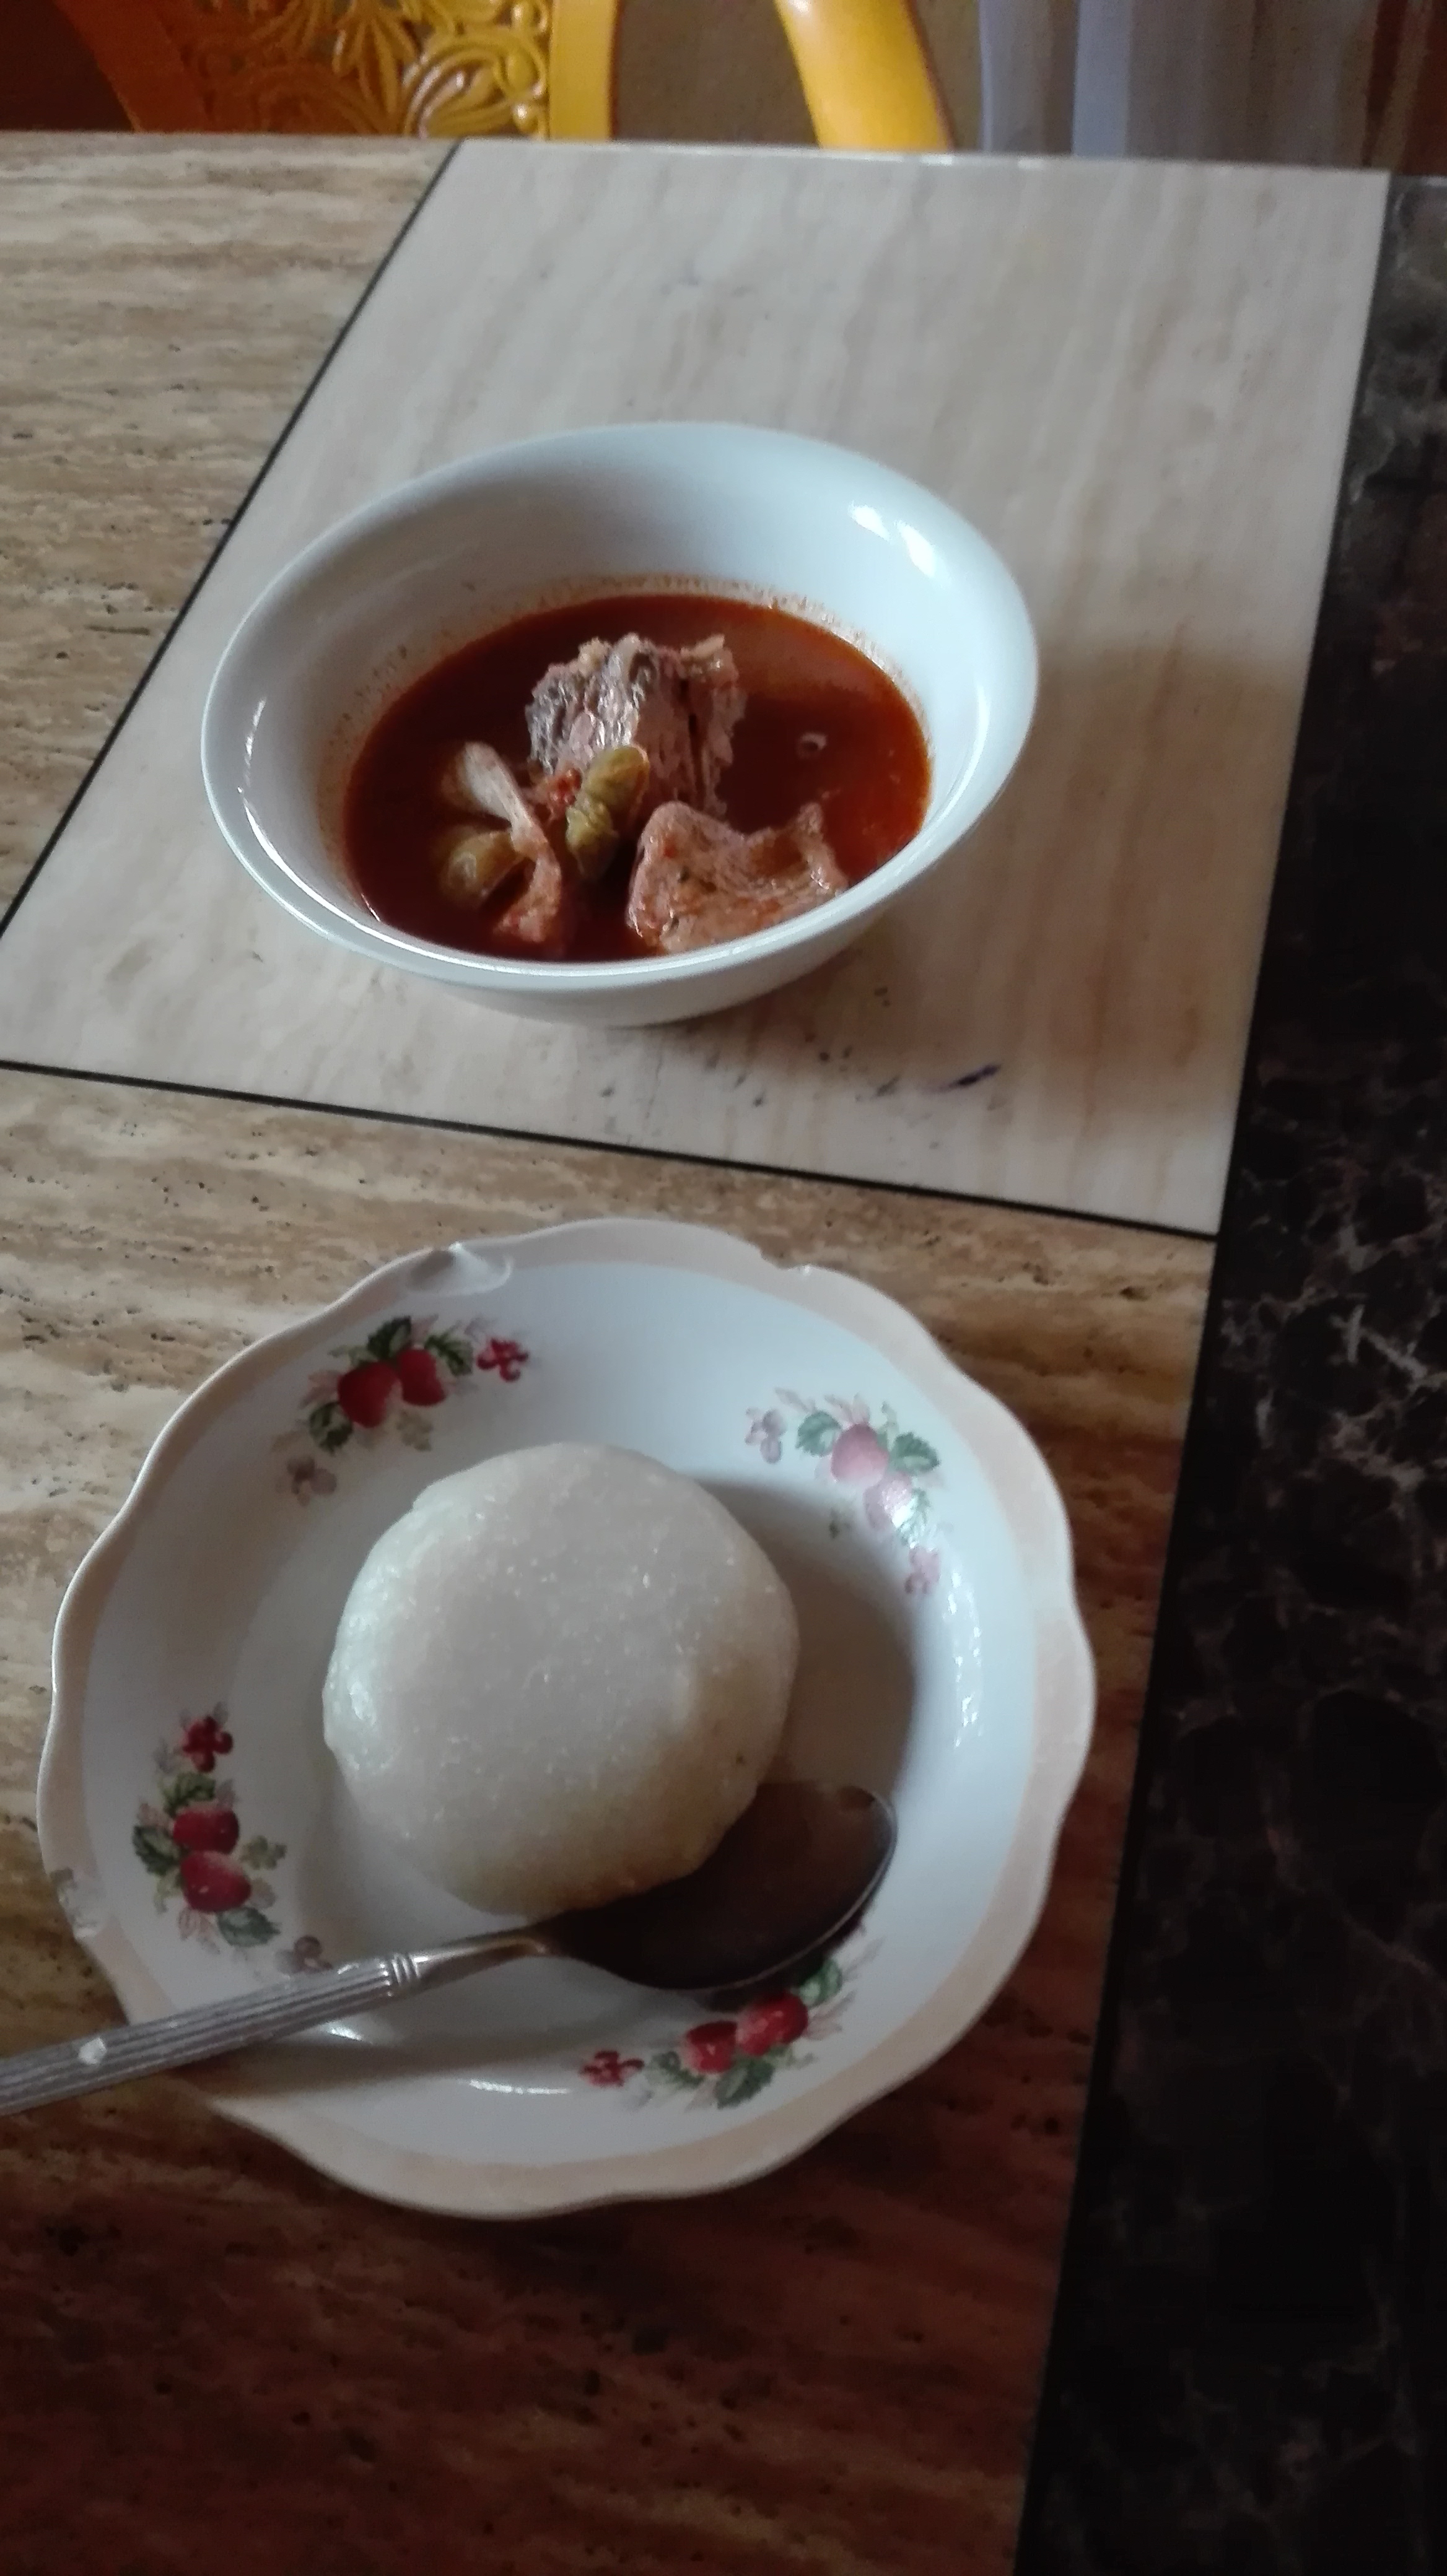 PEPPER SOUP and FUFU